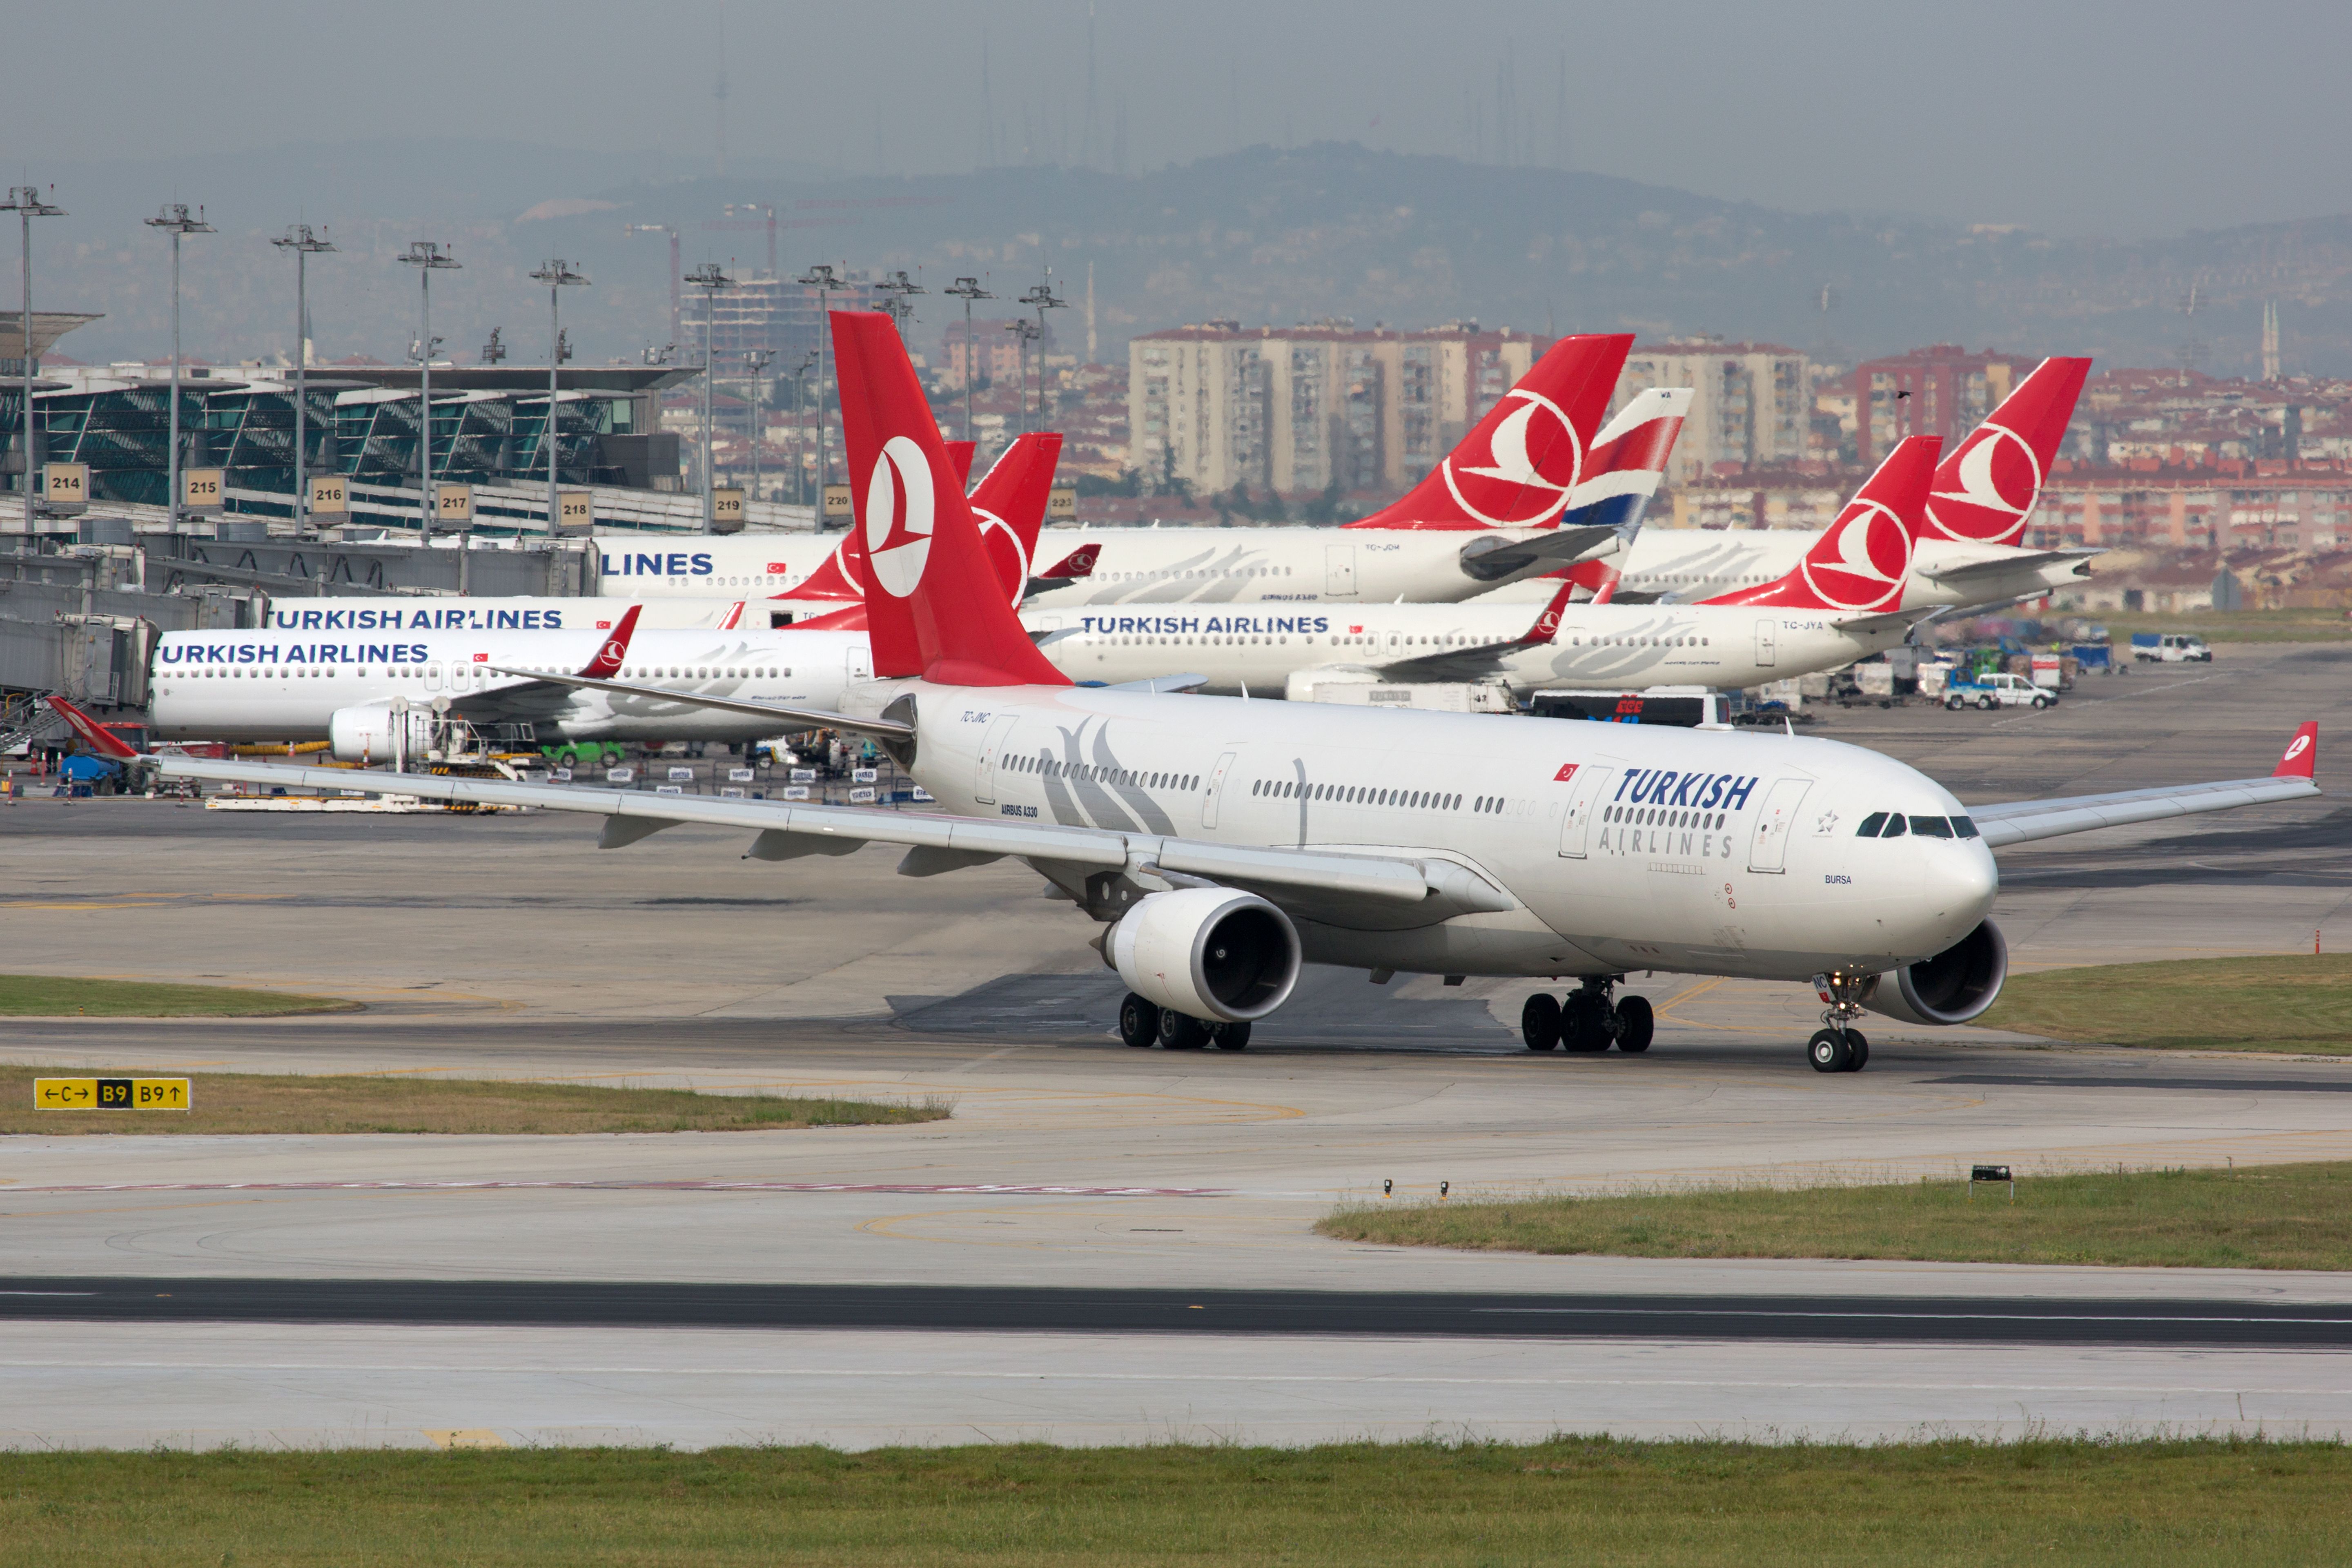 Turkish Airlines aircraft on the ground at Istanbul Airport